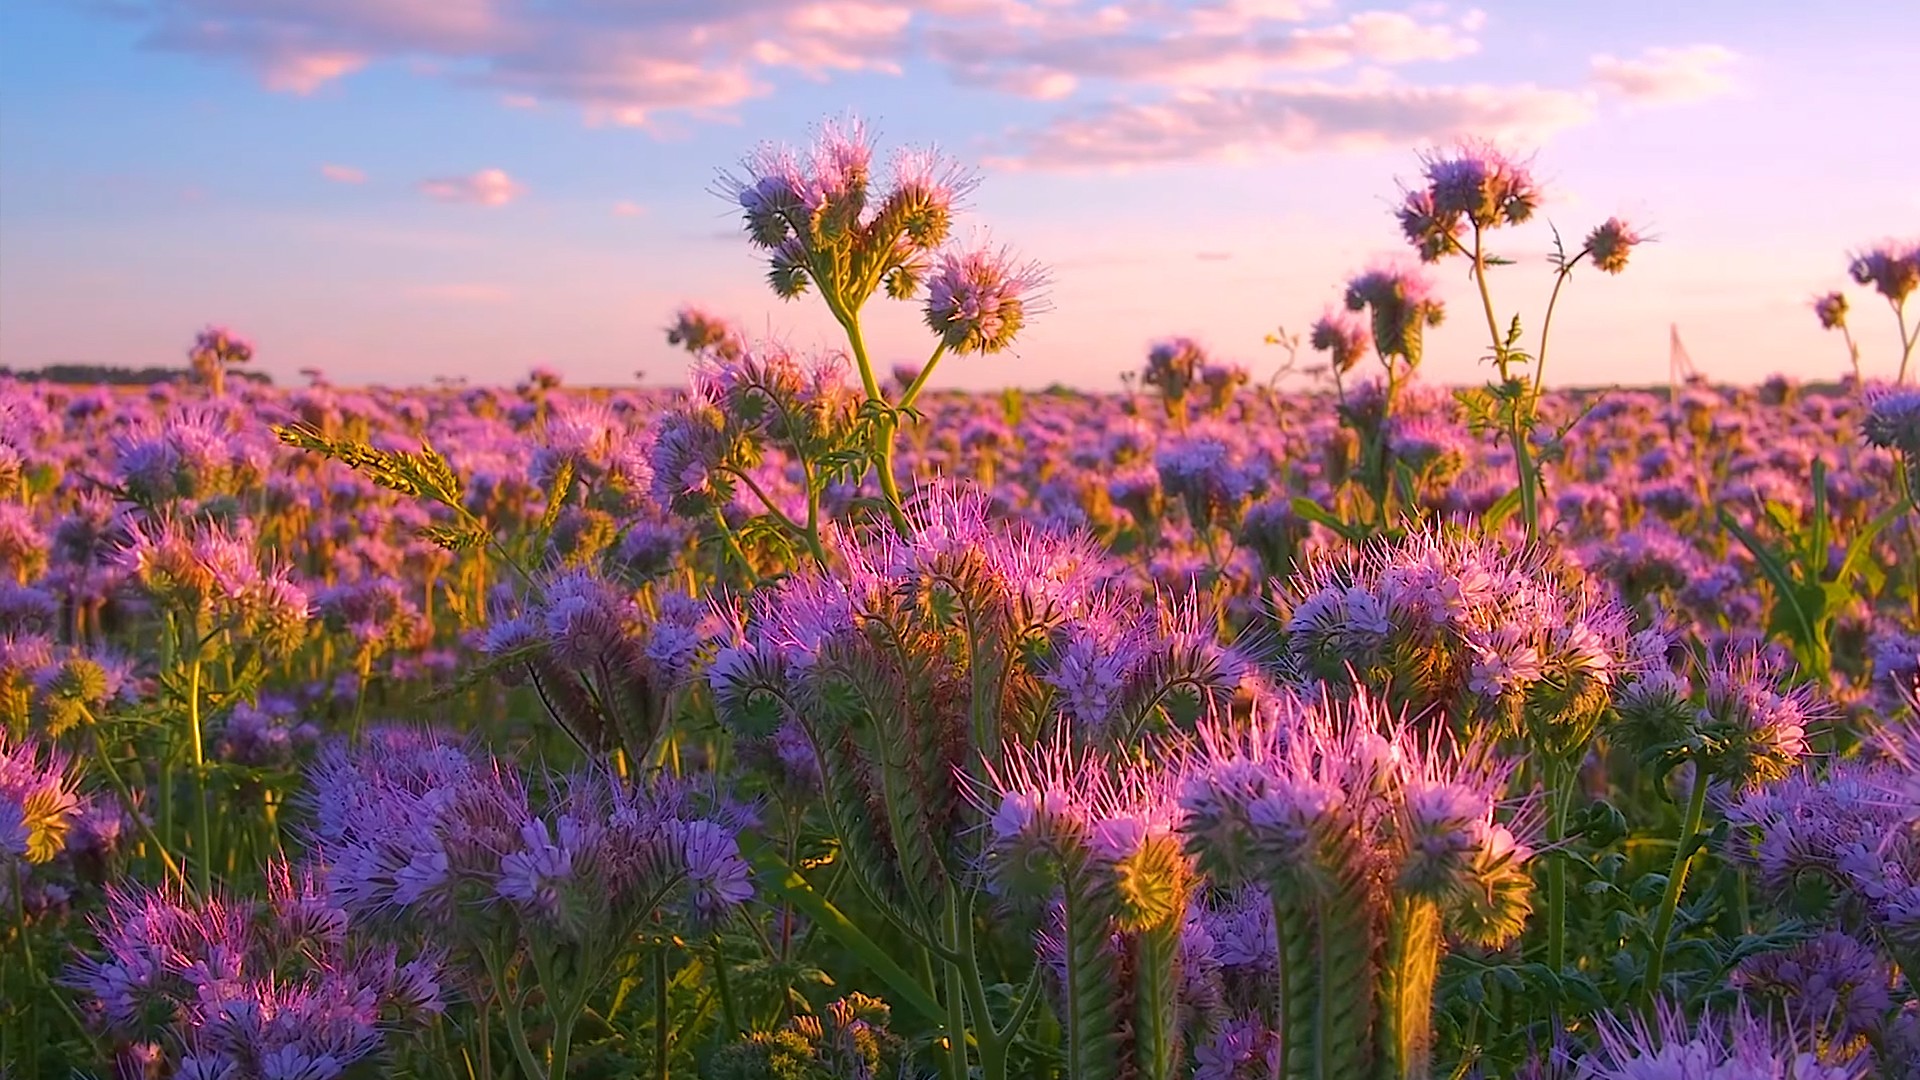 The Beautiful Soothing Tunes of Scenic Flower Field